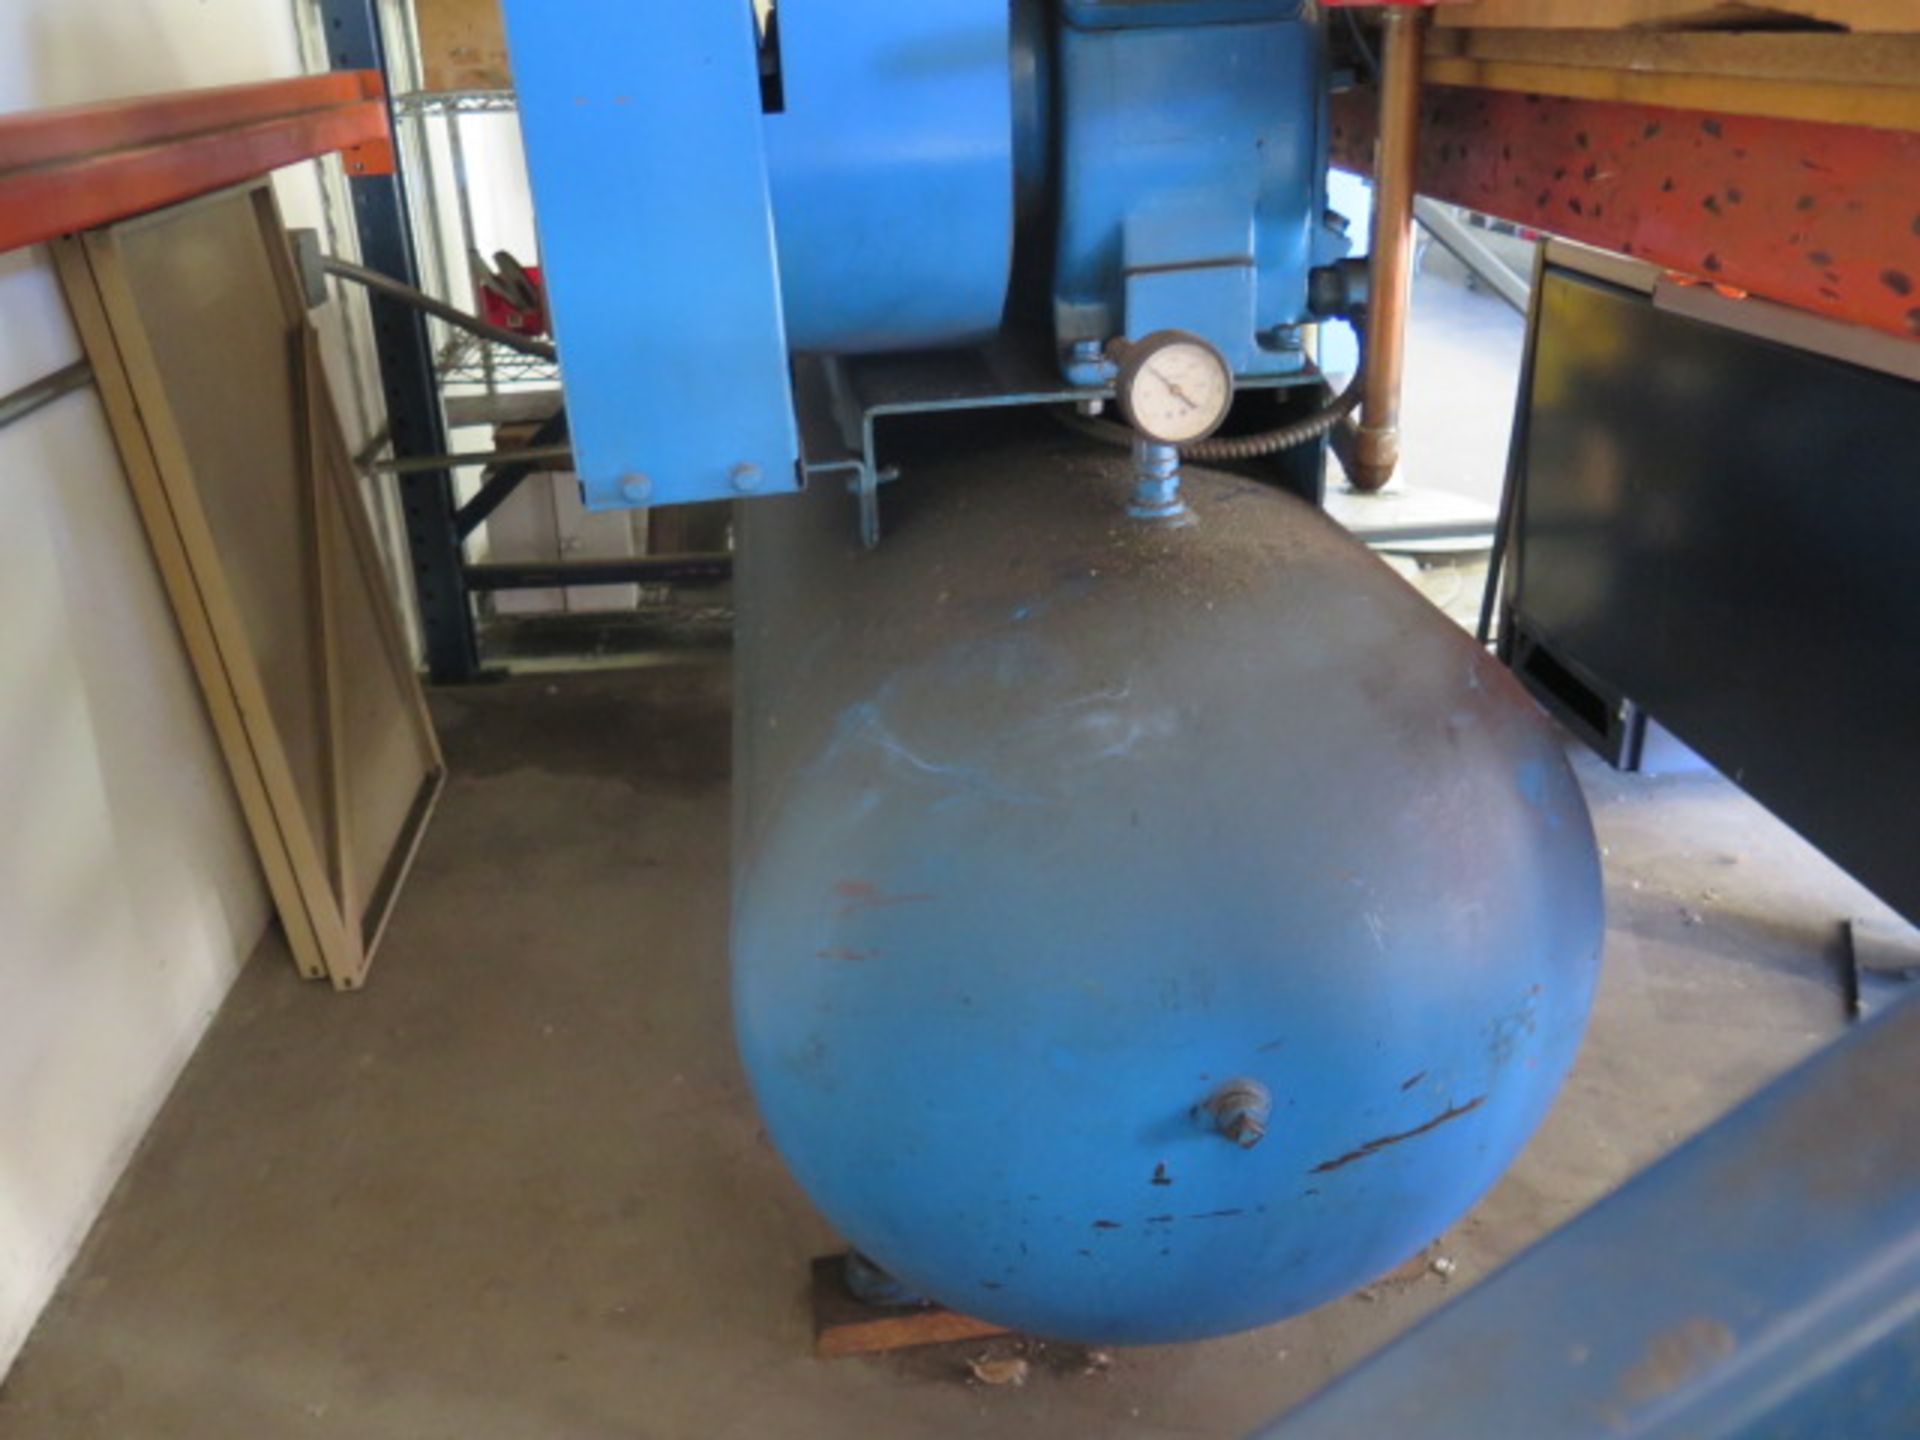 7.5Hp Horizontal Air Compressor w/ 2-Stage Pump, 120 Gallon Tankj (SOLD AS-IS - NO WARRANTY) - Image 2 of 5